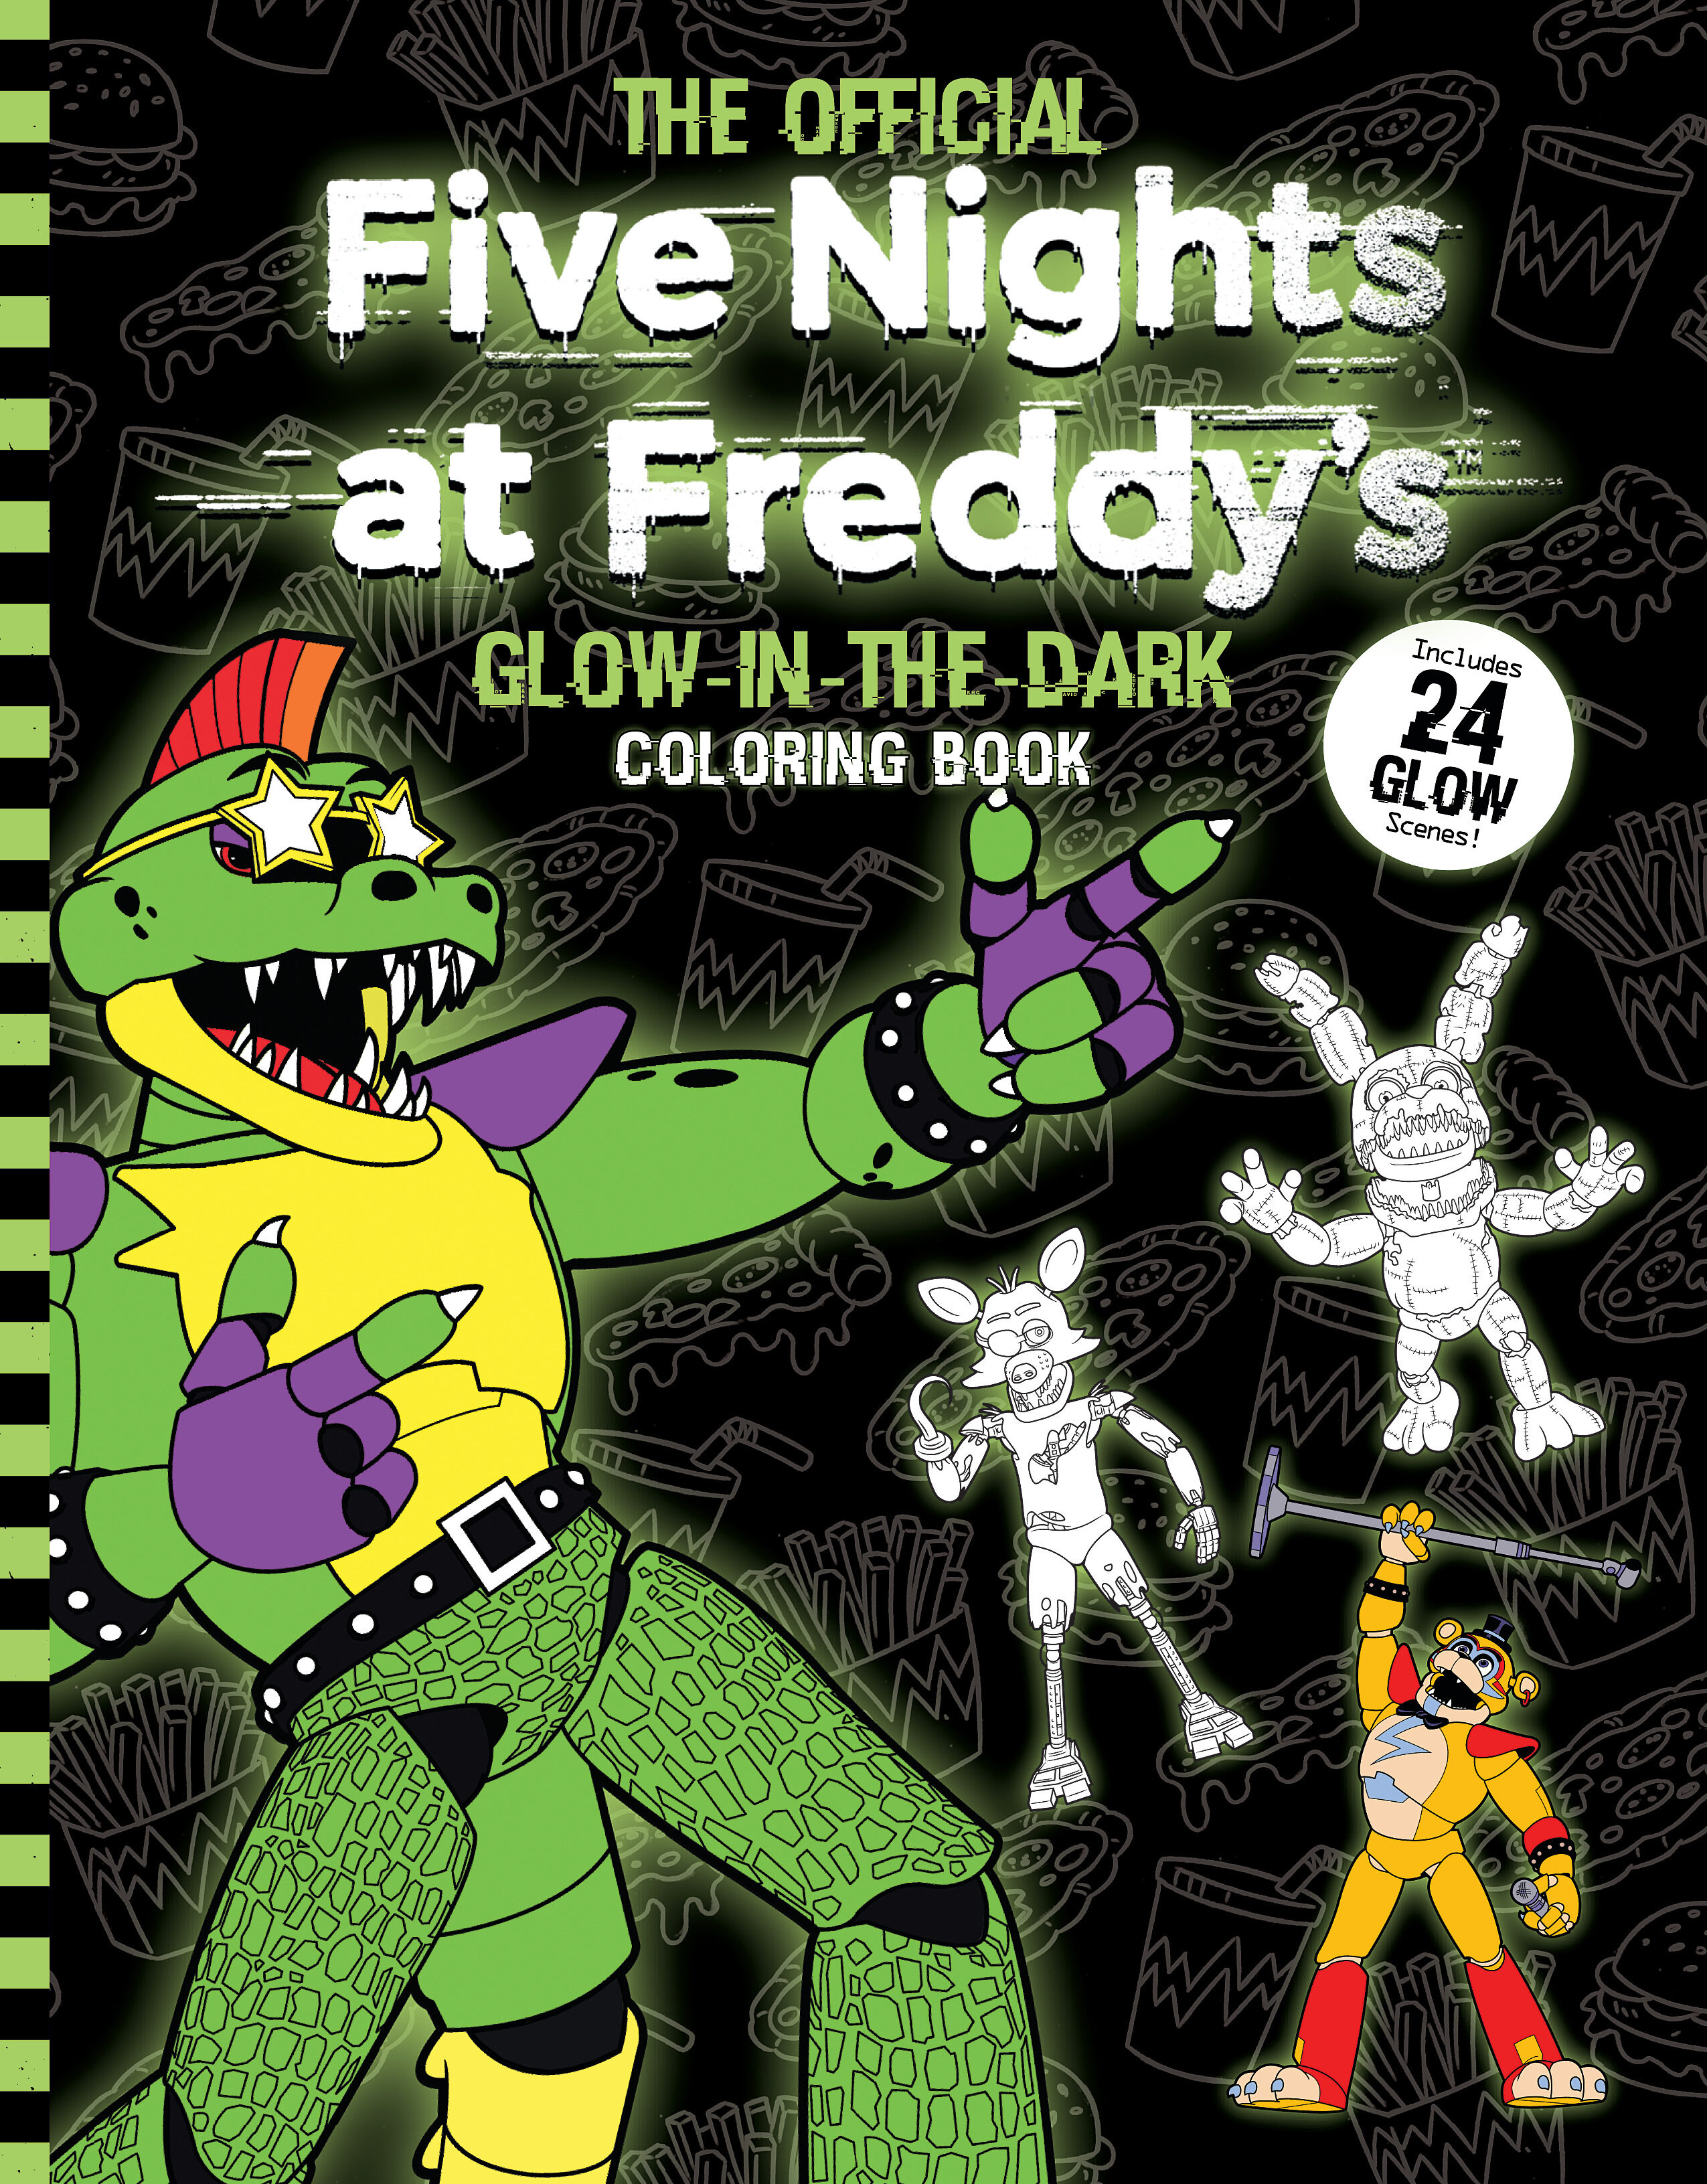 Eat like you're terrified with the Five Nights at Freddy's Cookbook